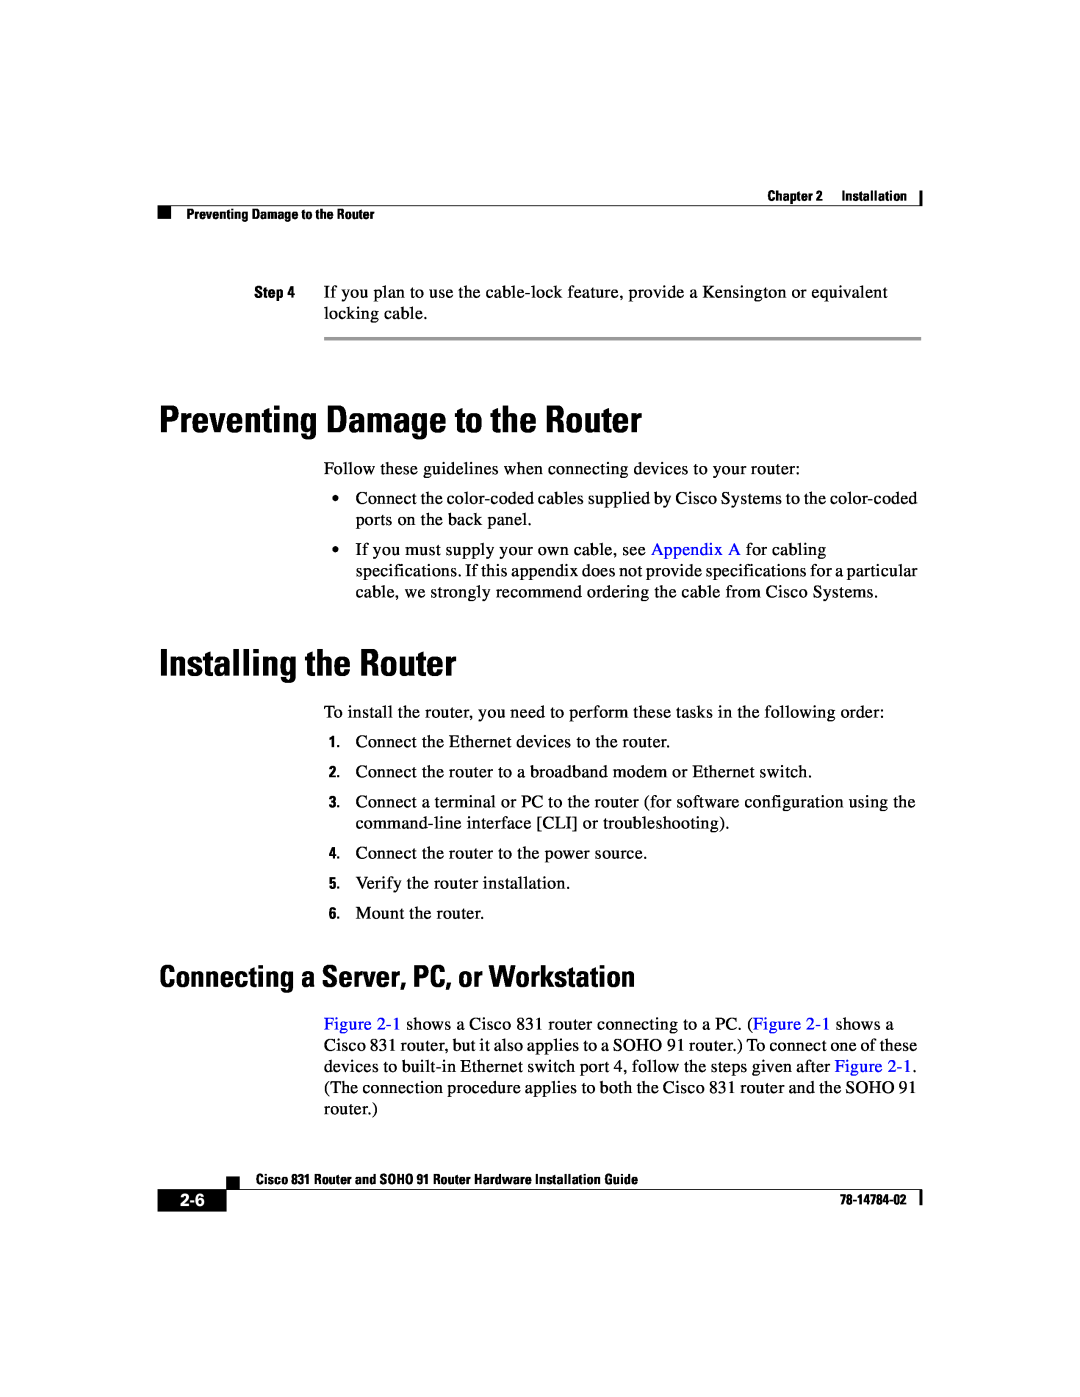 Cisco Systems 78-14784-02 Preventing Damage to the Router, Installing the Router, Connecting a Server, PC, or Workstation 